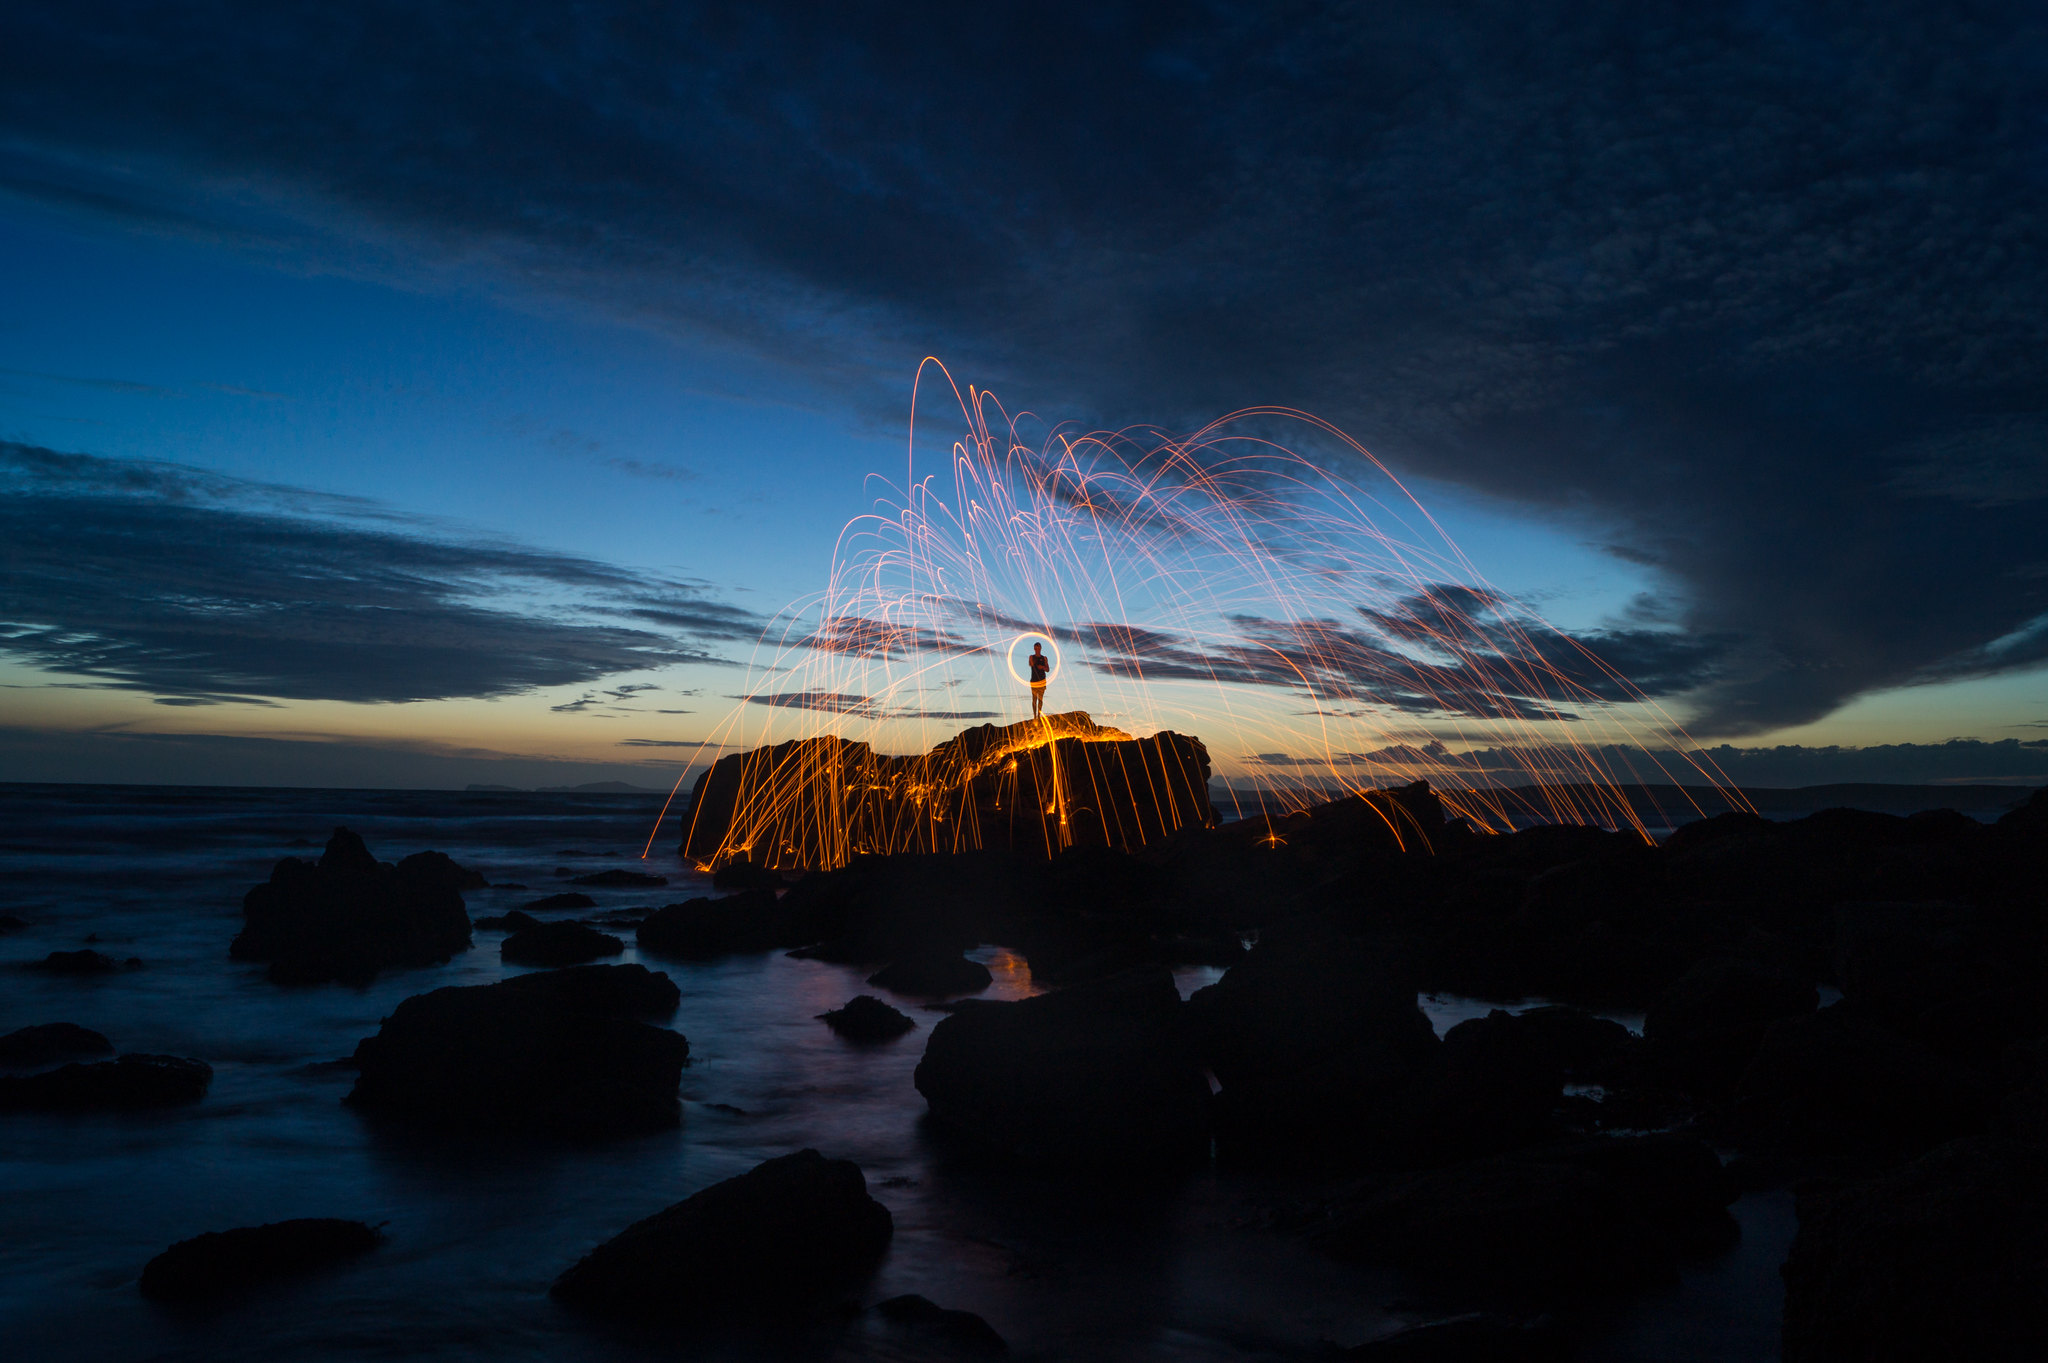 Light art creating patterns against the night sky on the coast of Pembrokeshire in Wales